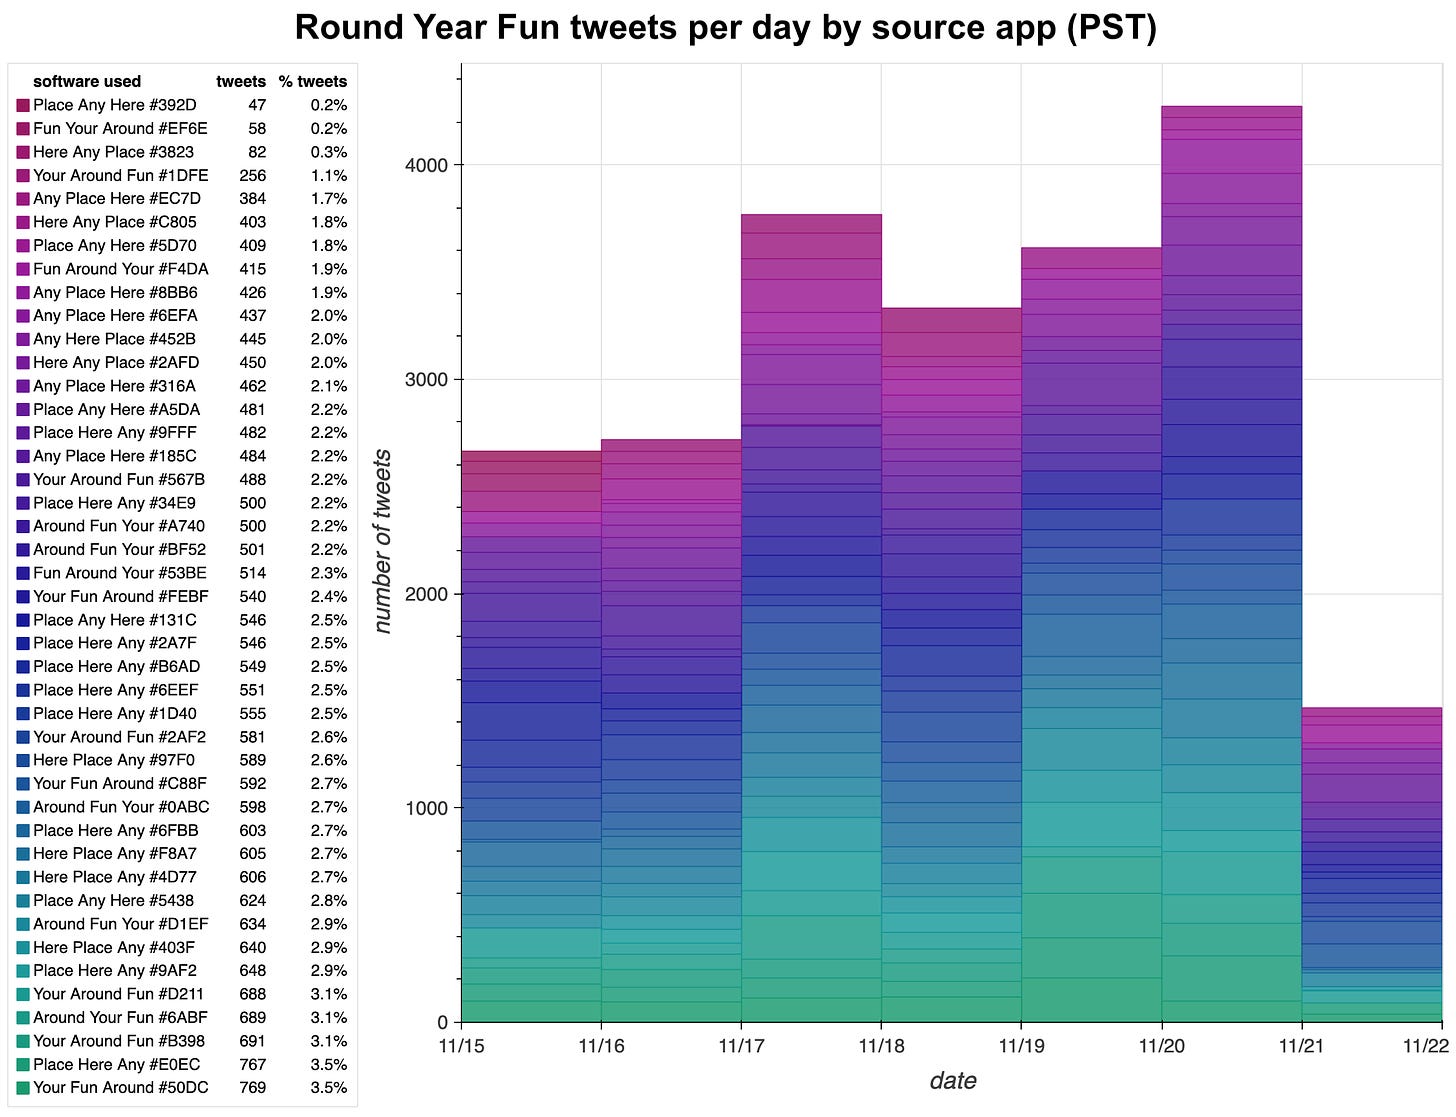 tweet volume by source app chart for tweets generated by Round Year Fun Nov 15th-21st 2022